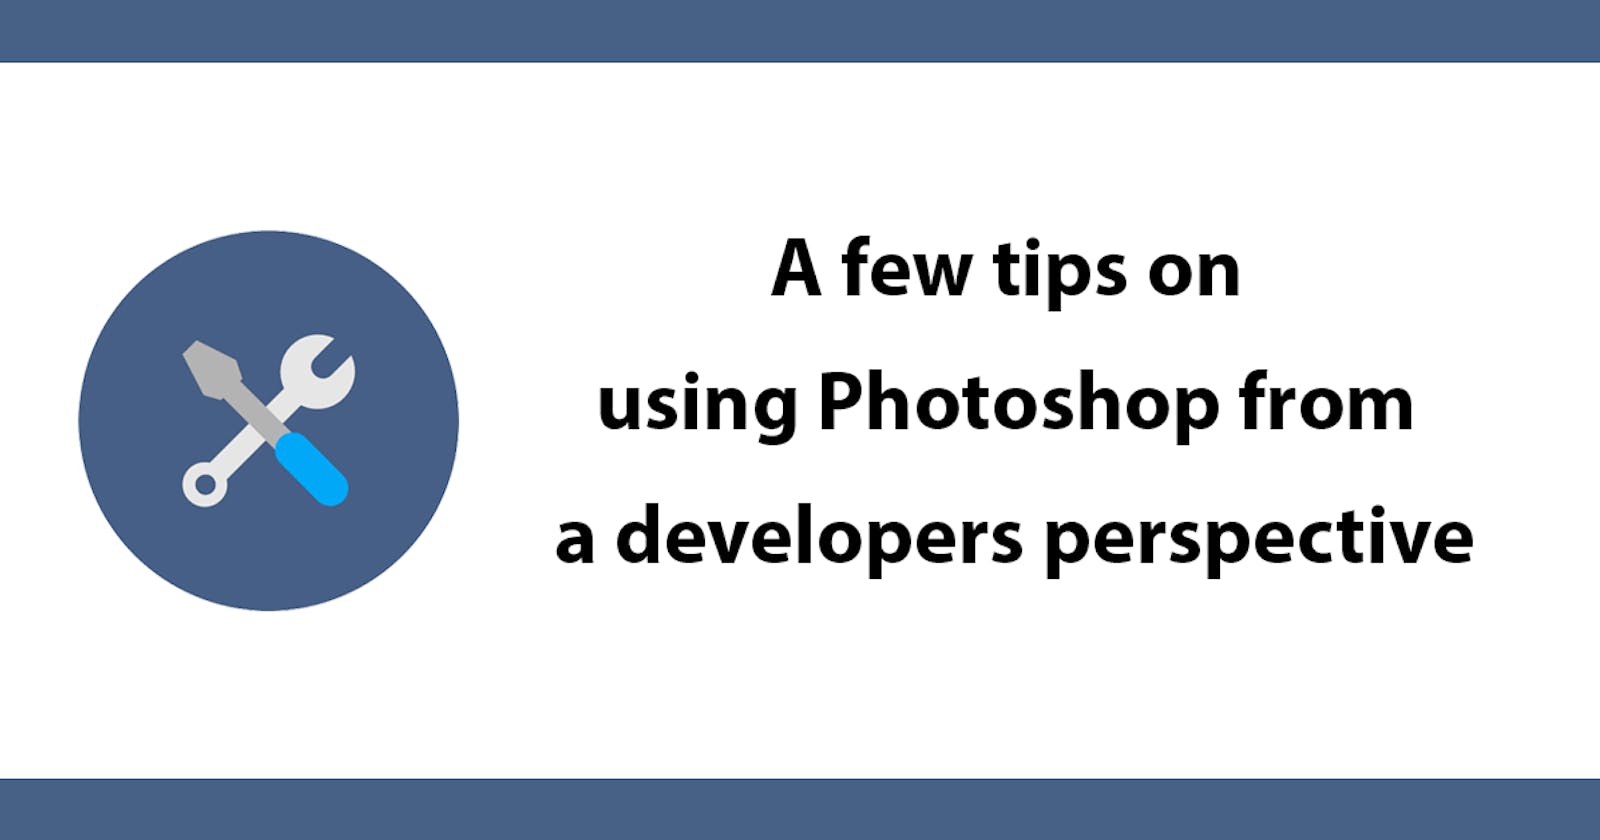 A few tips on using Photoshop from a developers perspective